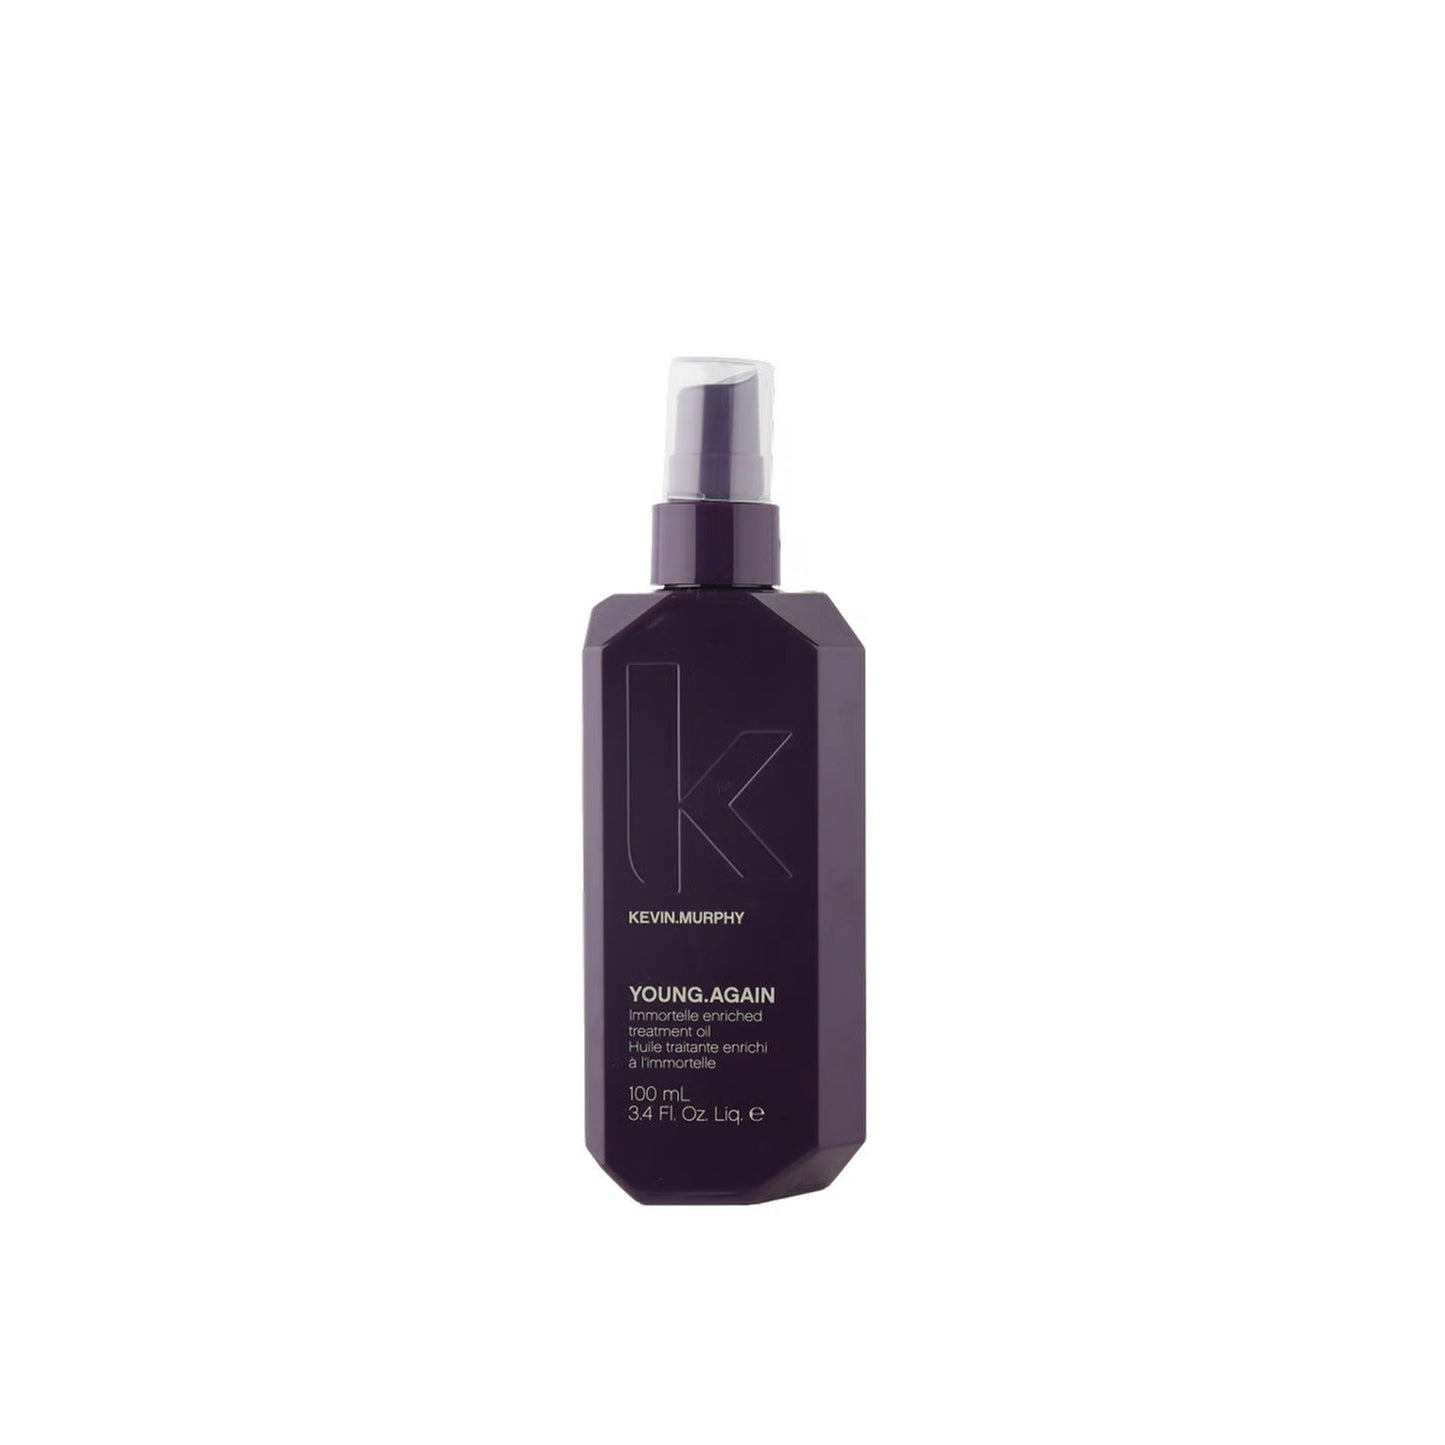 KEVIN.MURPHY YOUNG.AGAIN OIL